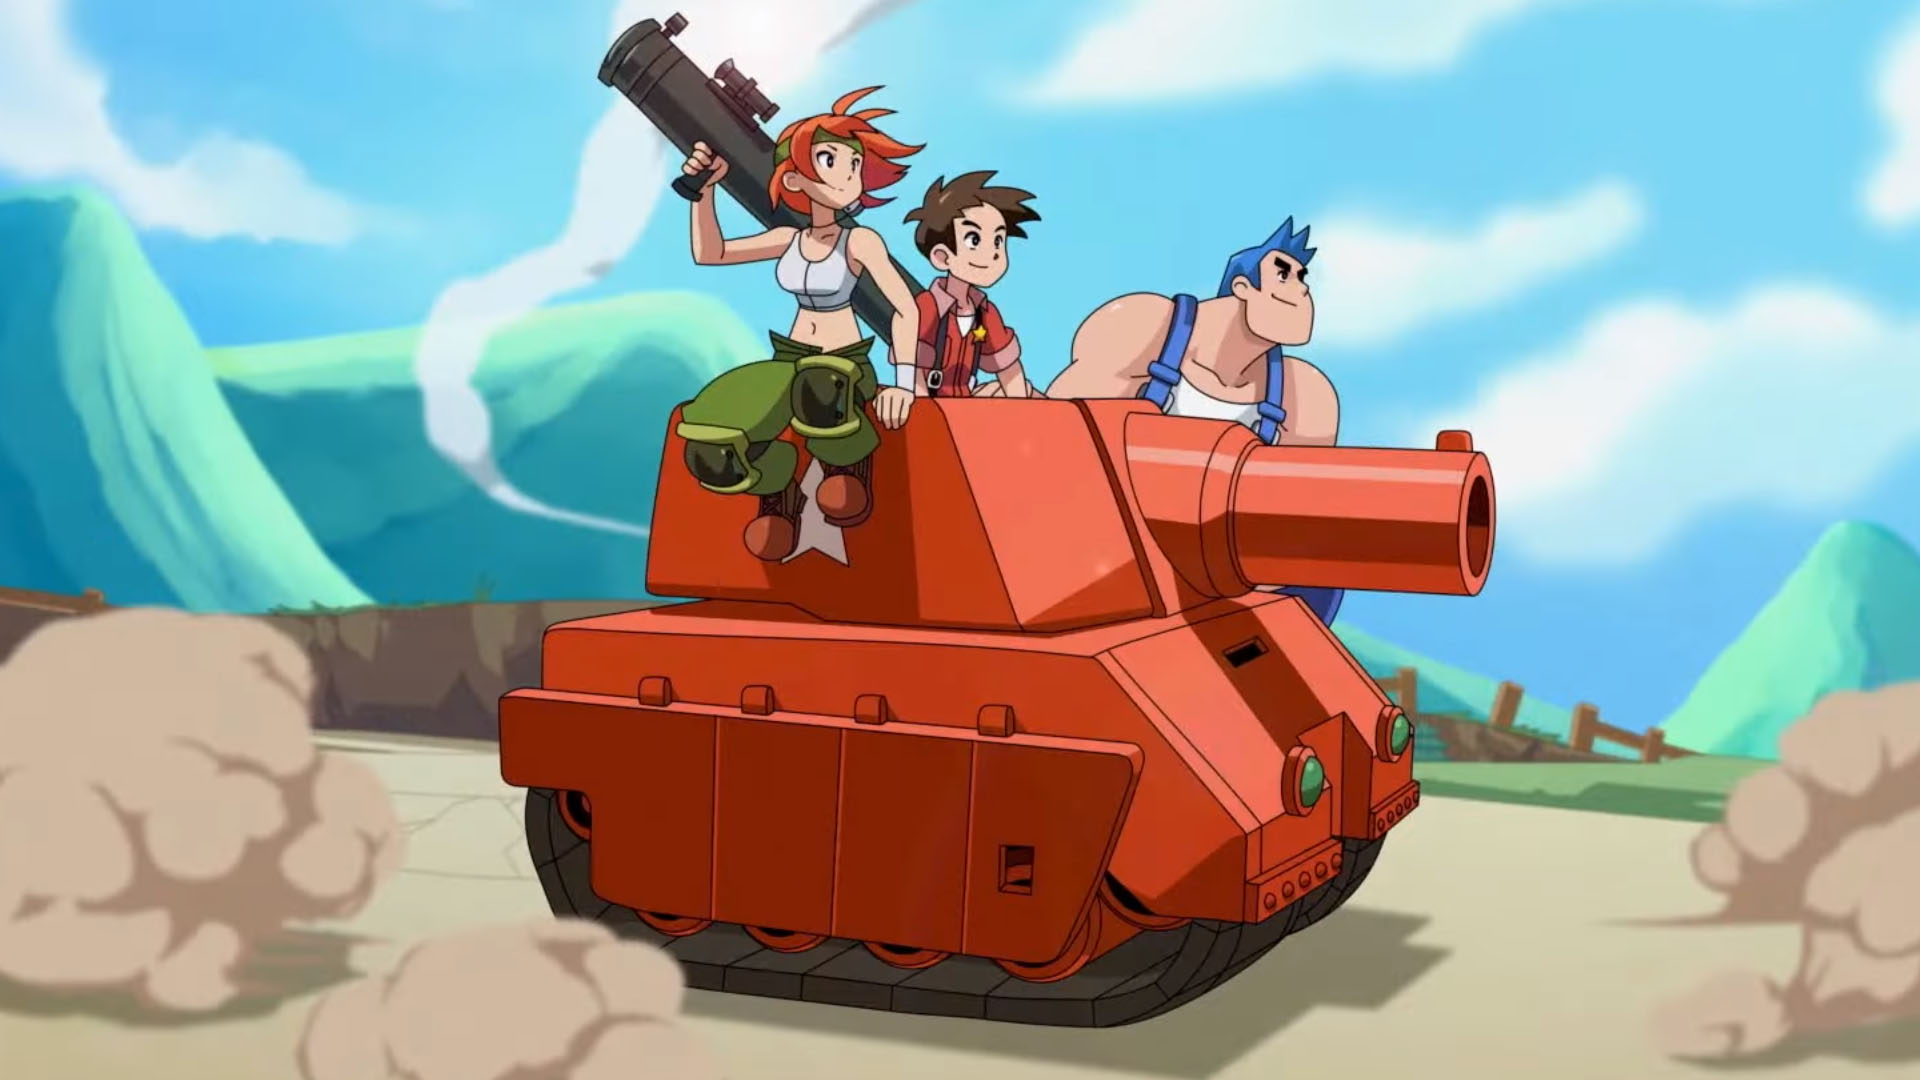 Advance Wars 1+2: Re-Boot Camp gets new overview trailer